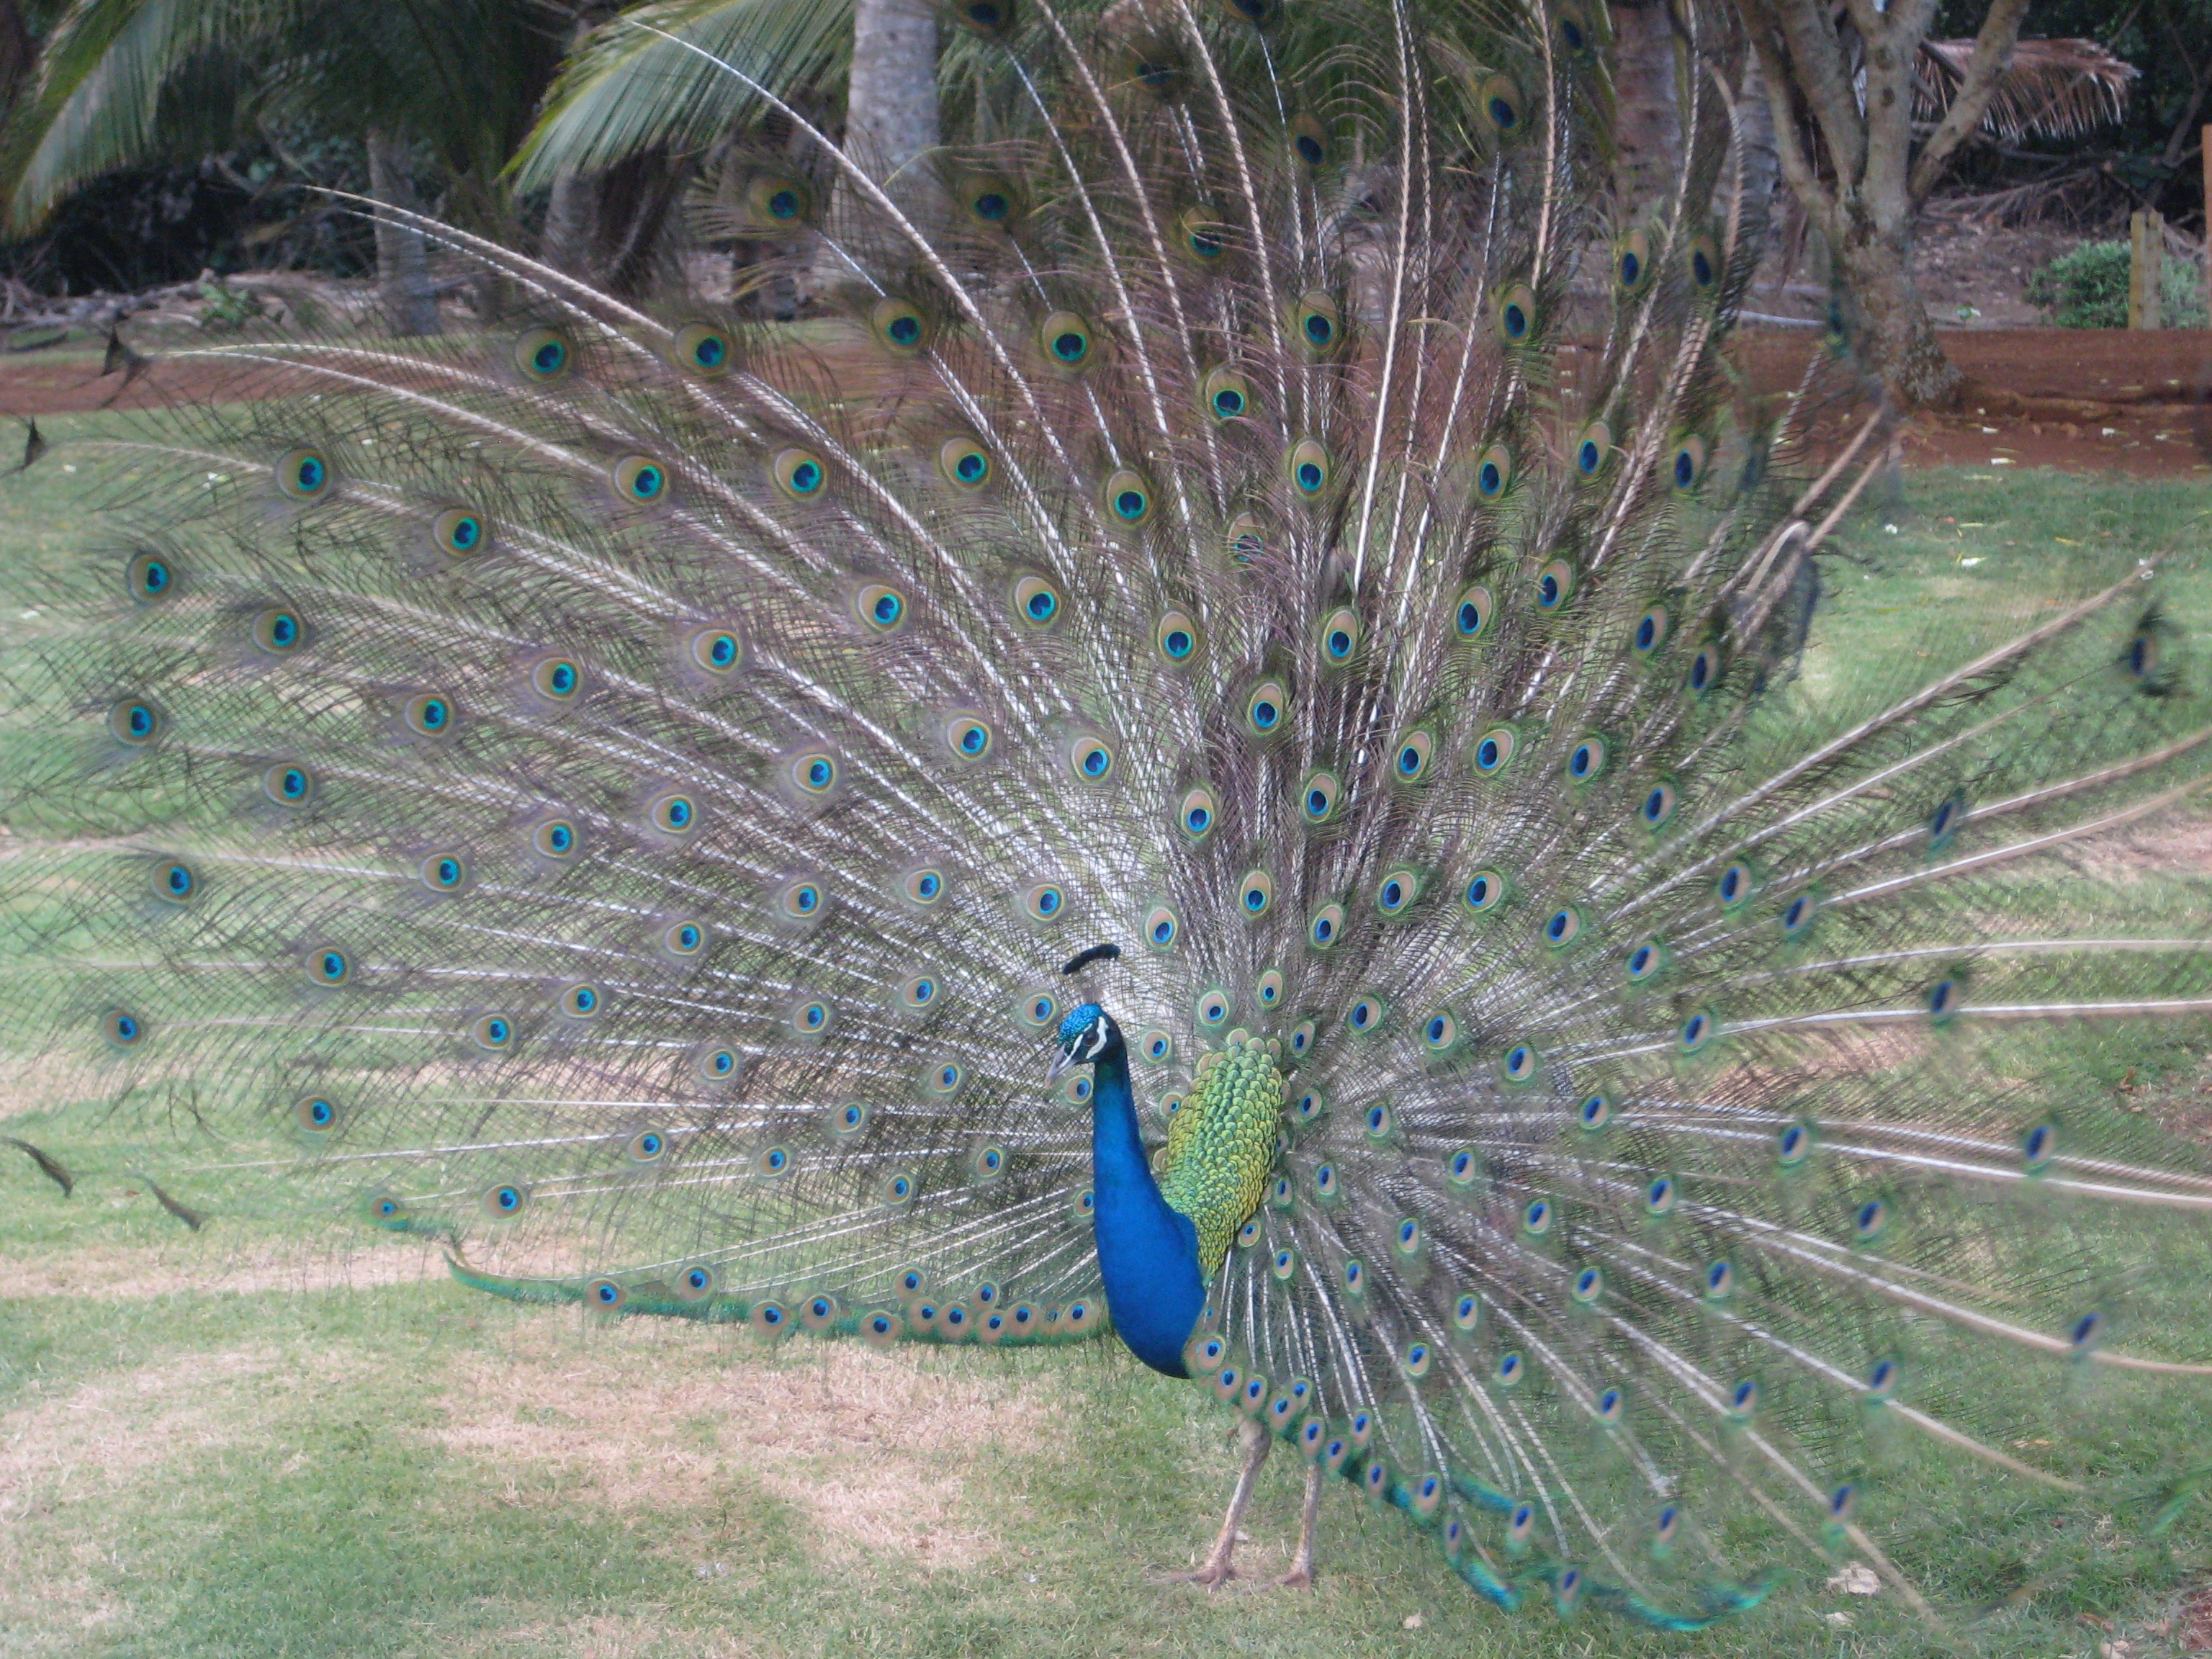 Peacock showing off his beautiful plumage to the ladies.